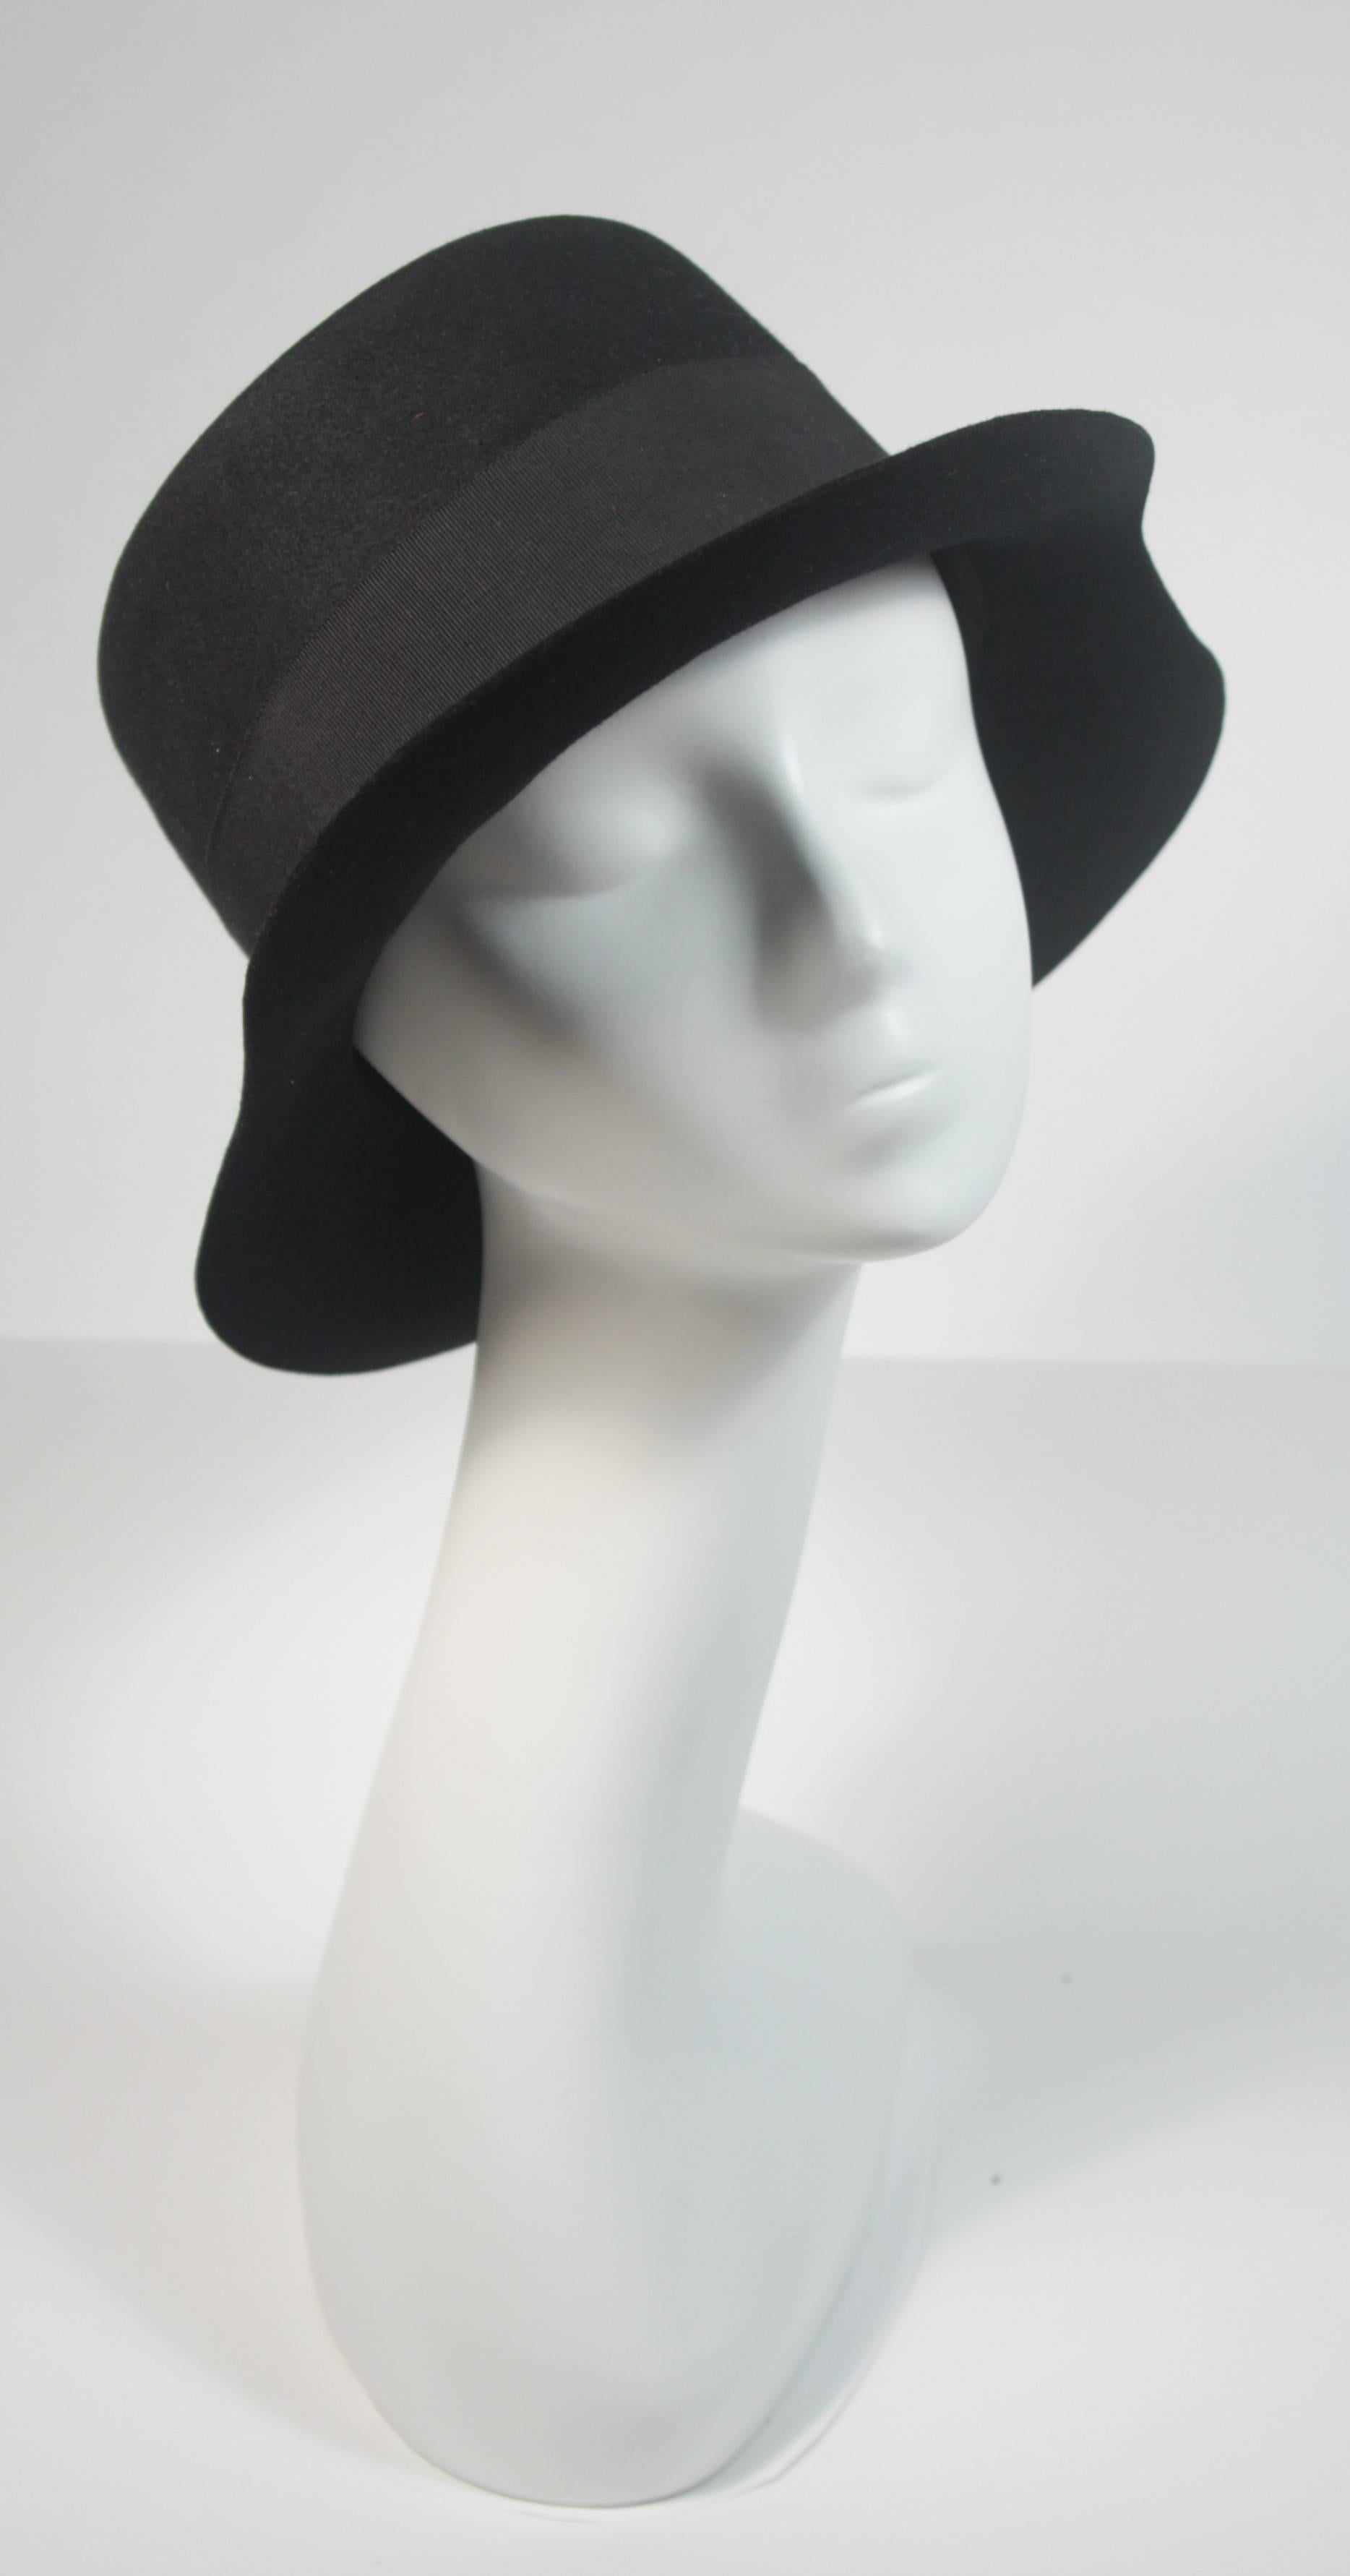 This Yves Saint Laurent Rive Gauche design is available for viewing at our Beverly Hills Boutique. We offer a large selection of evening gowns and luxury garments. 

 This hat is composed of a black wool felt and features a curved brim. In